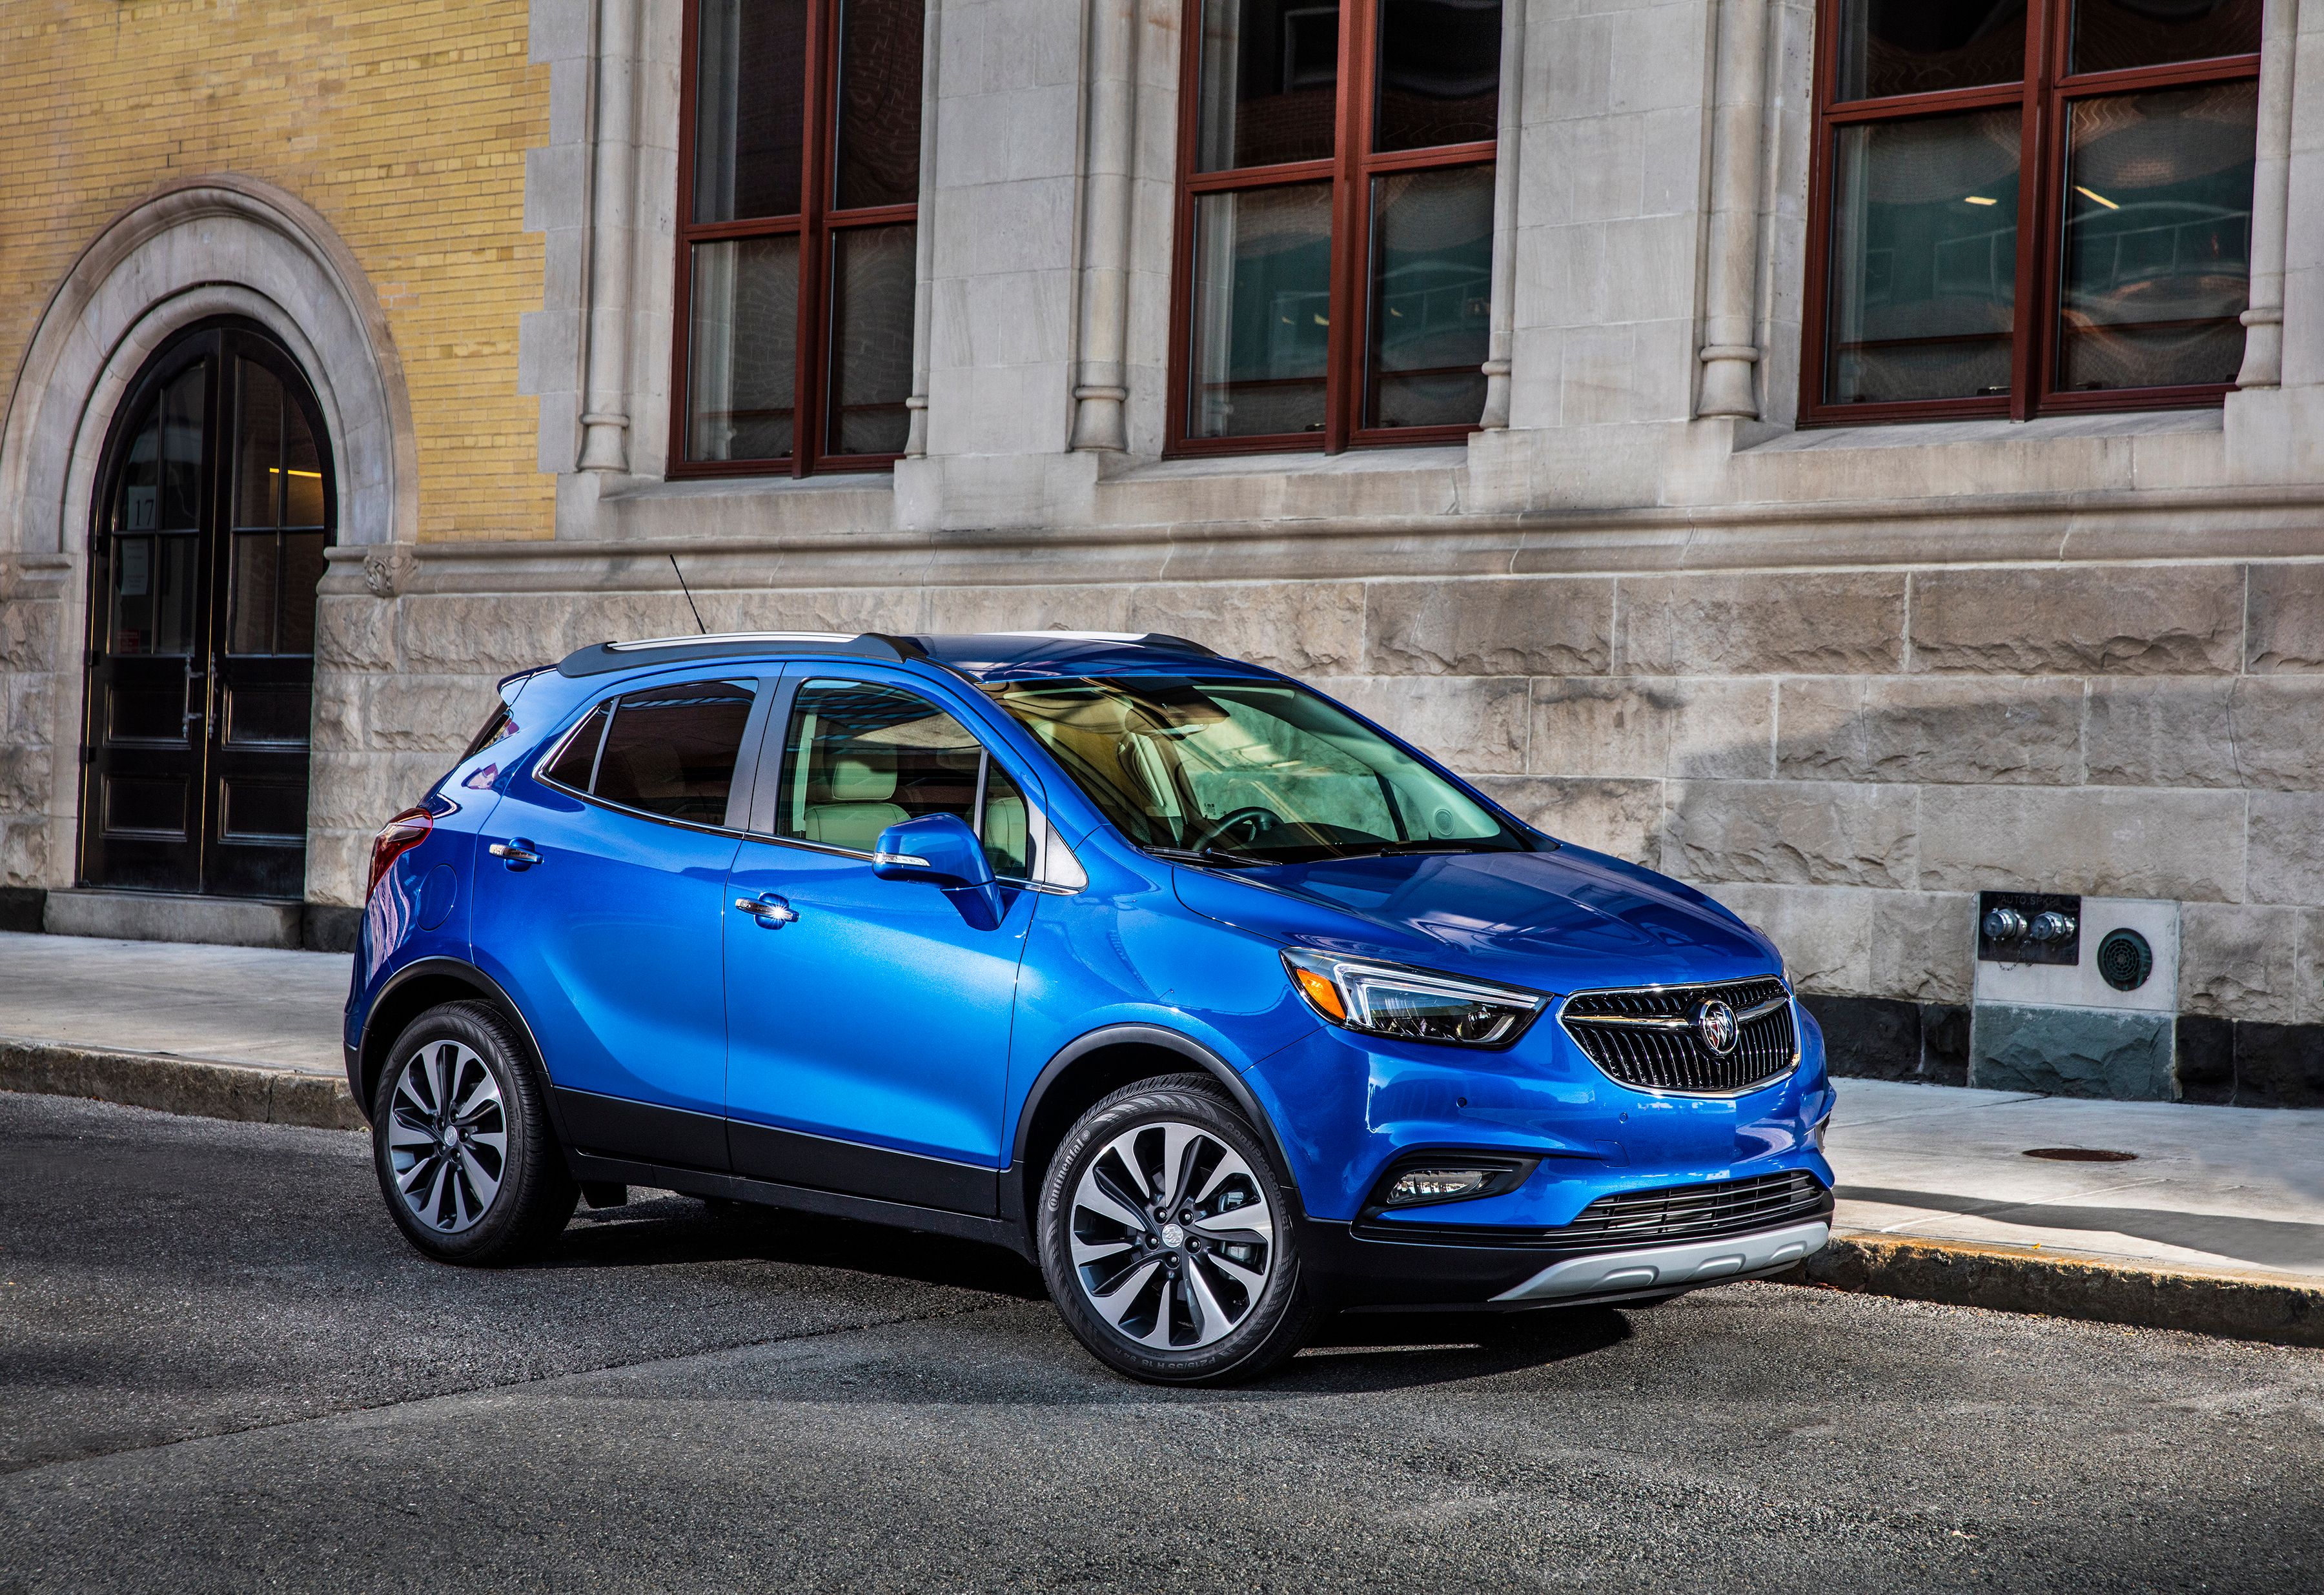 The 2019 Buick Encore on the street.